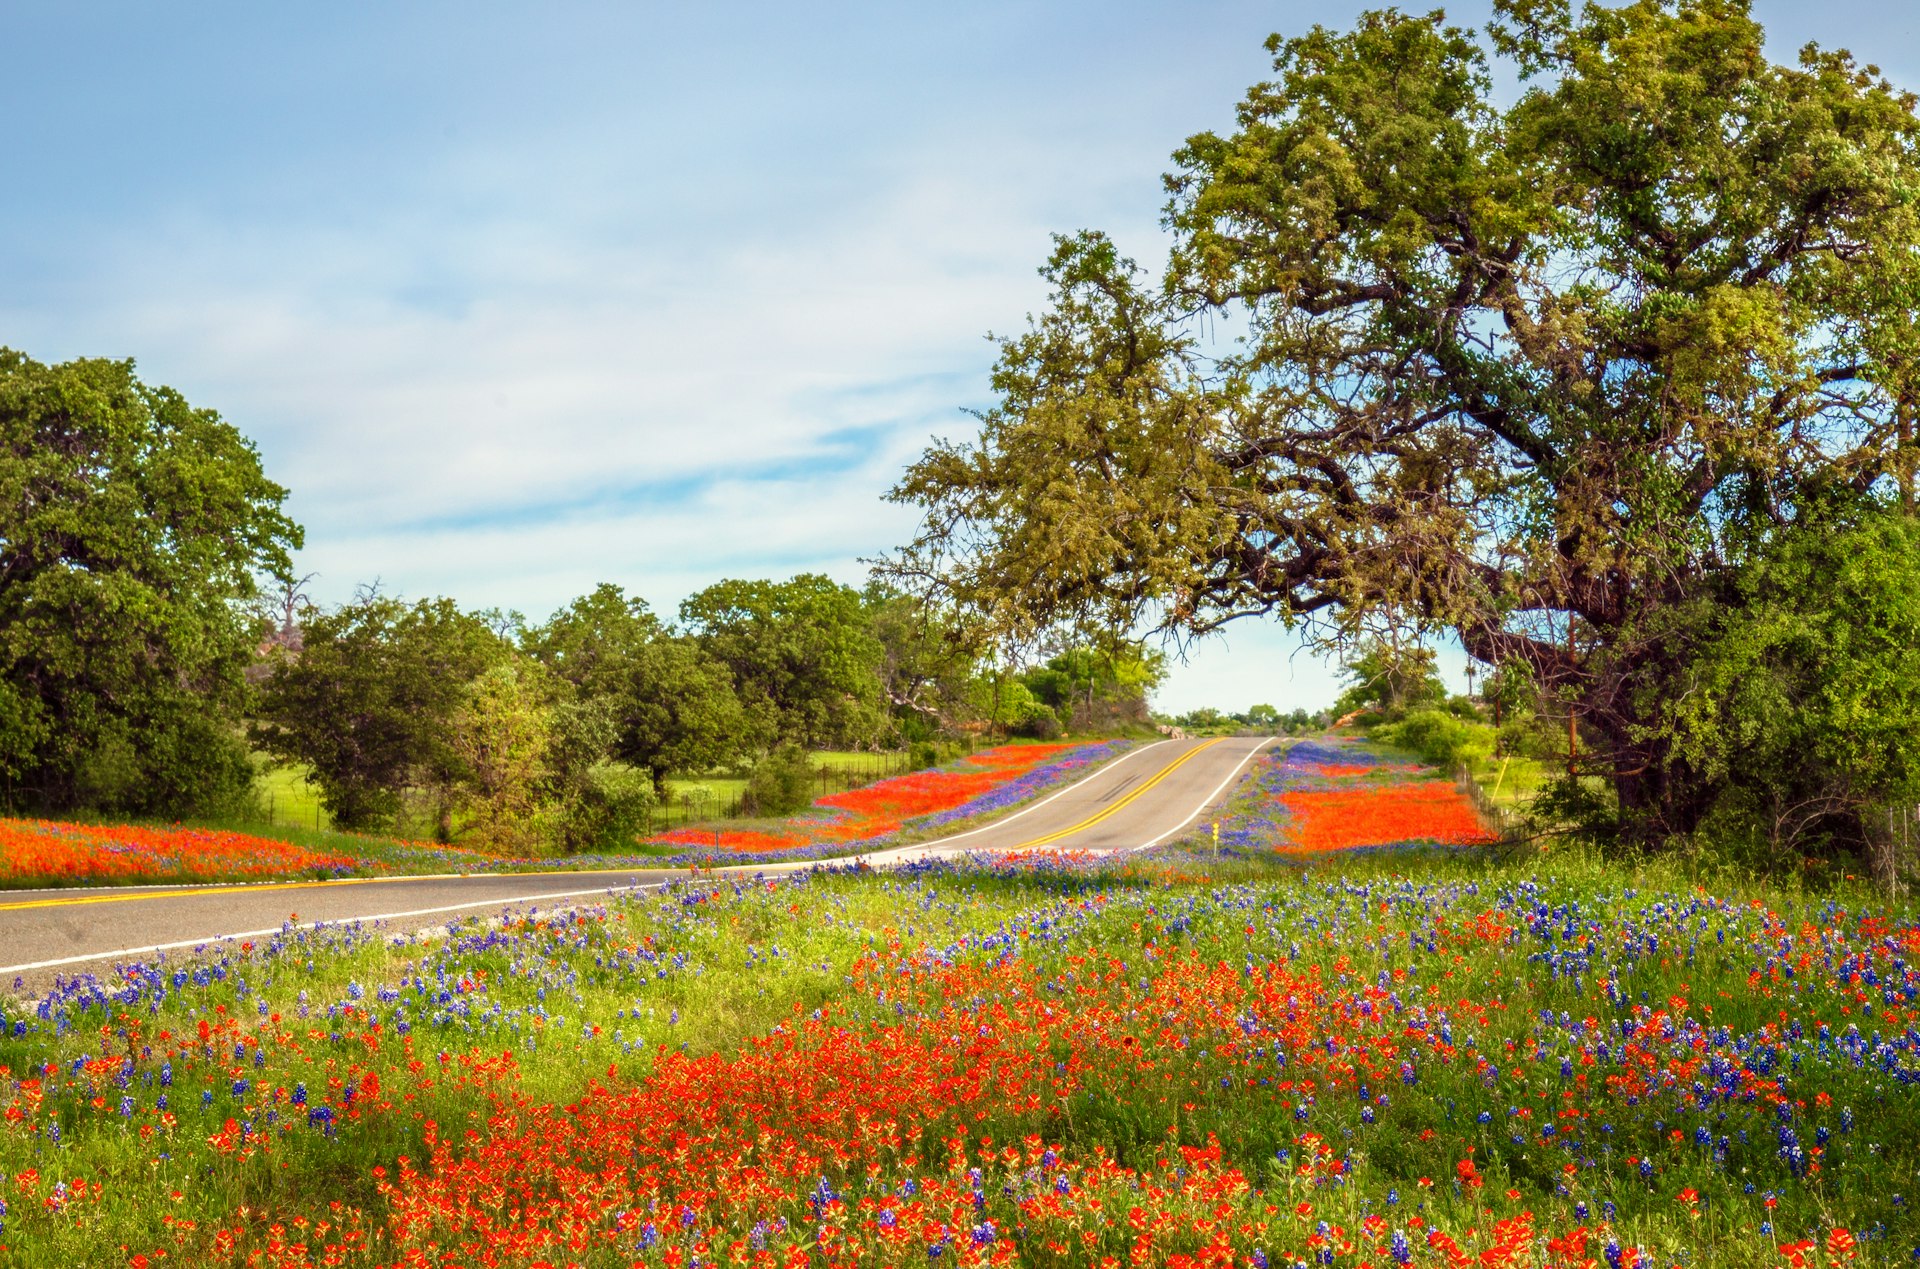 An empty road lined with wildflowers in lovely hues of red and blue on a spring day